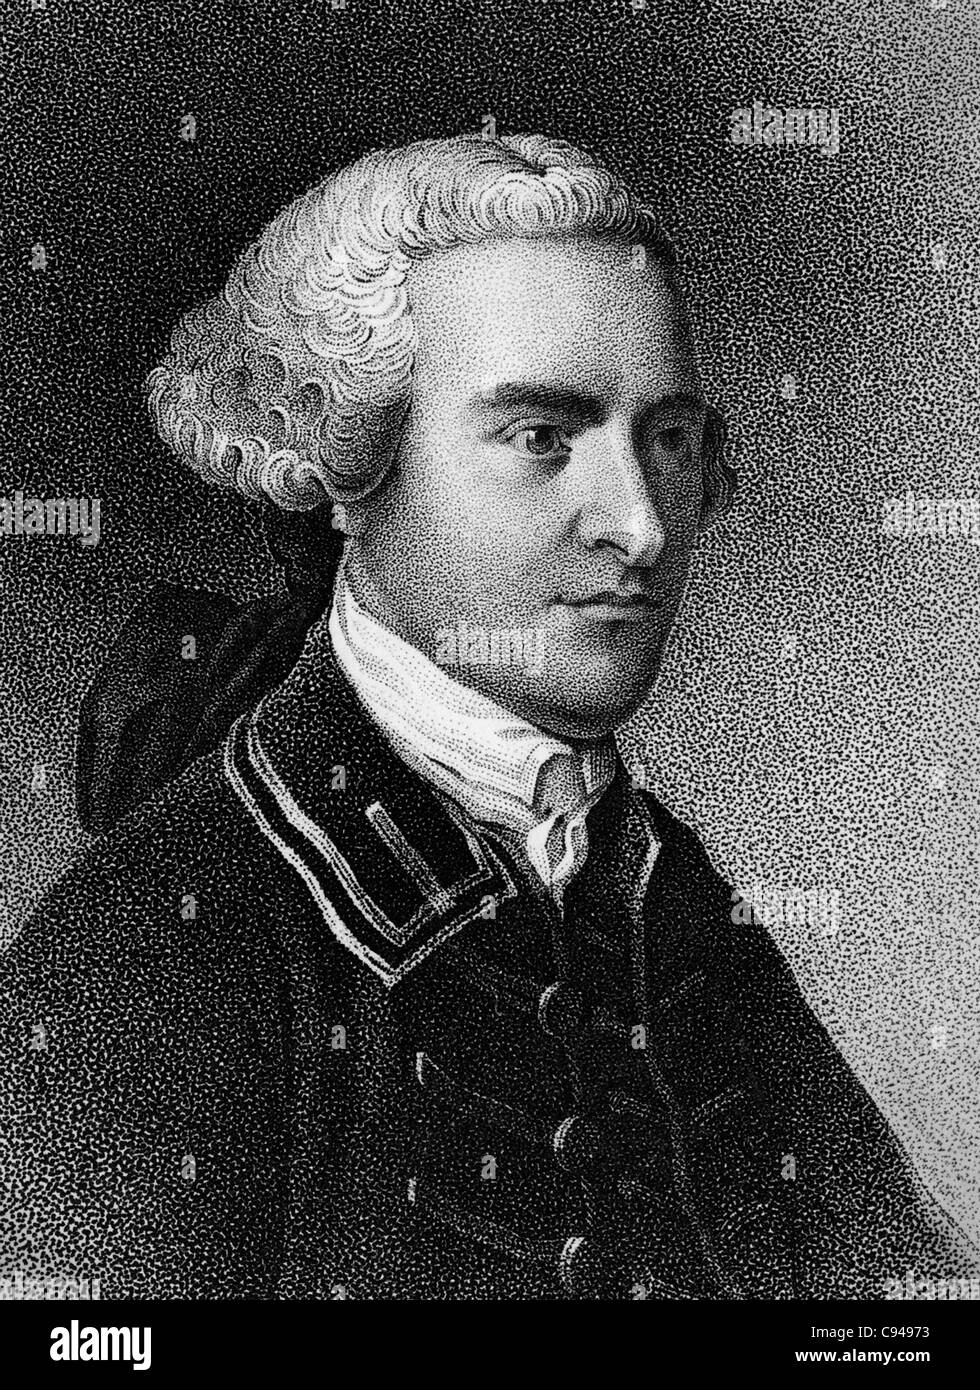 Vintage portrait print of American statesman John Hancock (1737 - 1793) - President of the Second Continental Congress from 1775 to 1777 and the first person to sign the US Declaration of Independence. Stock Photo